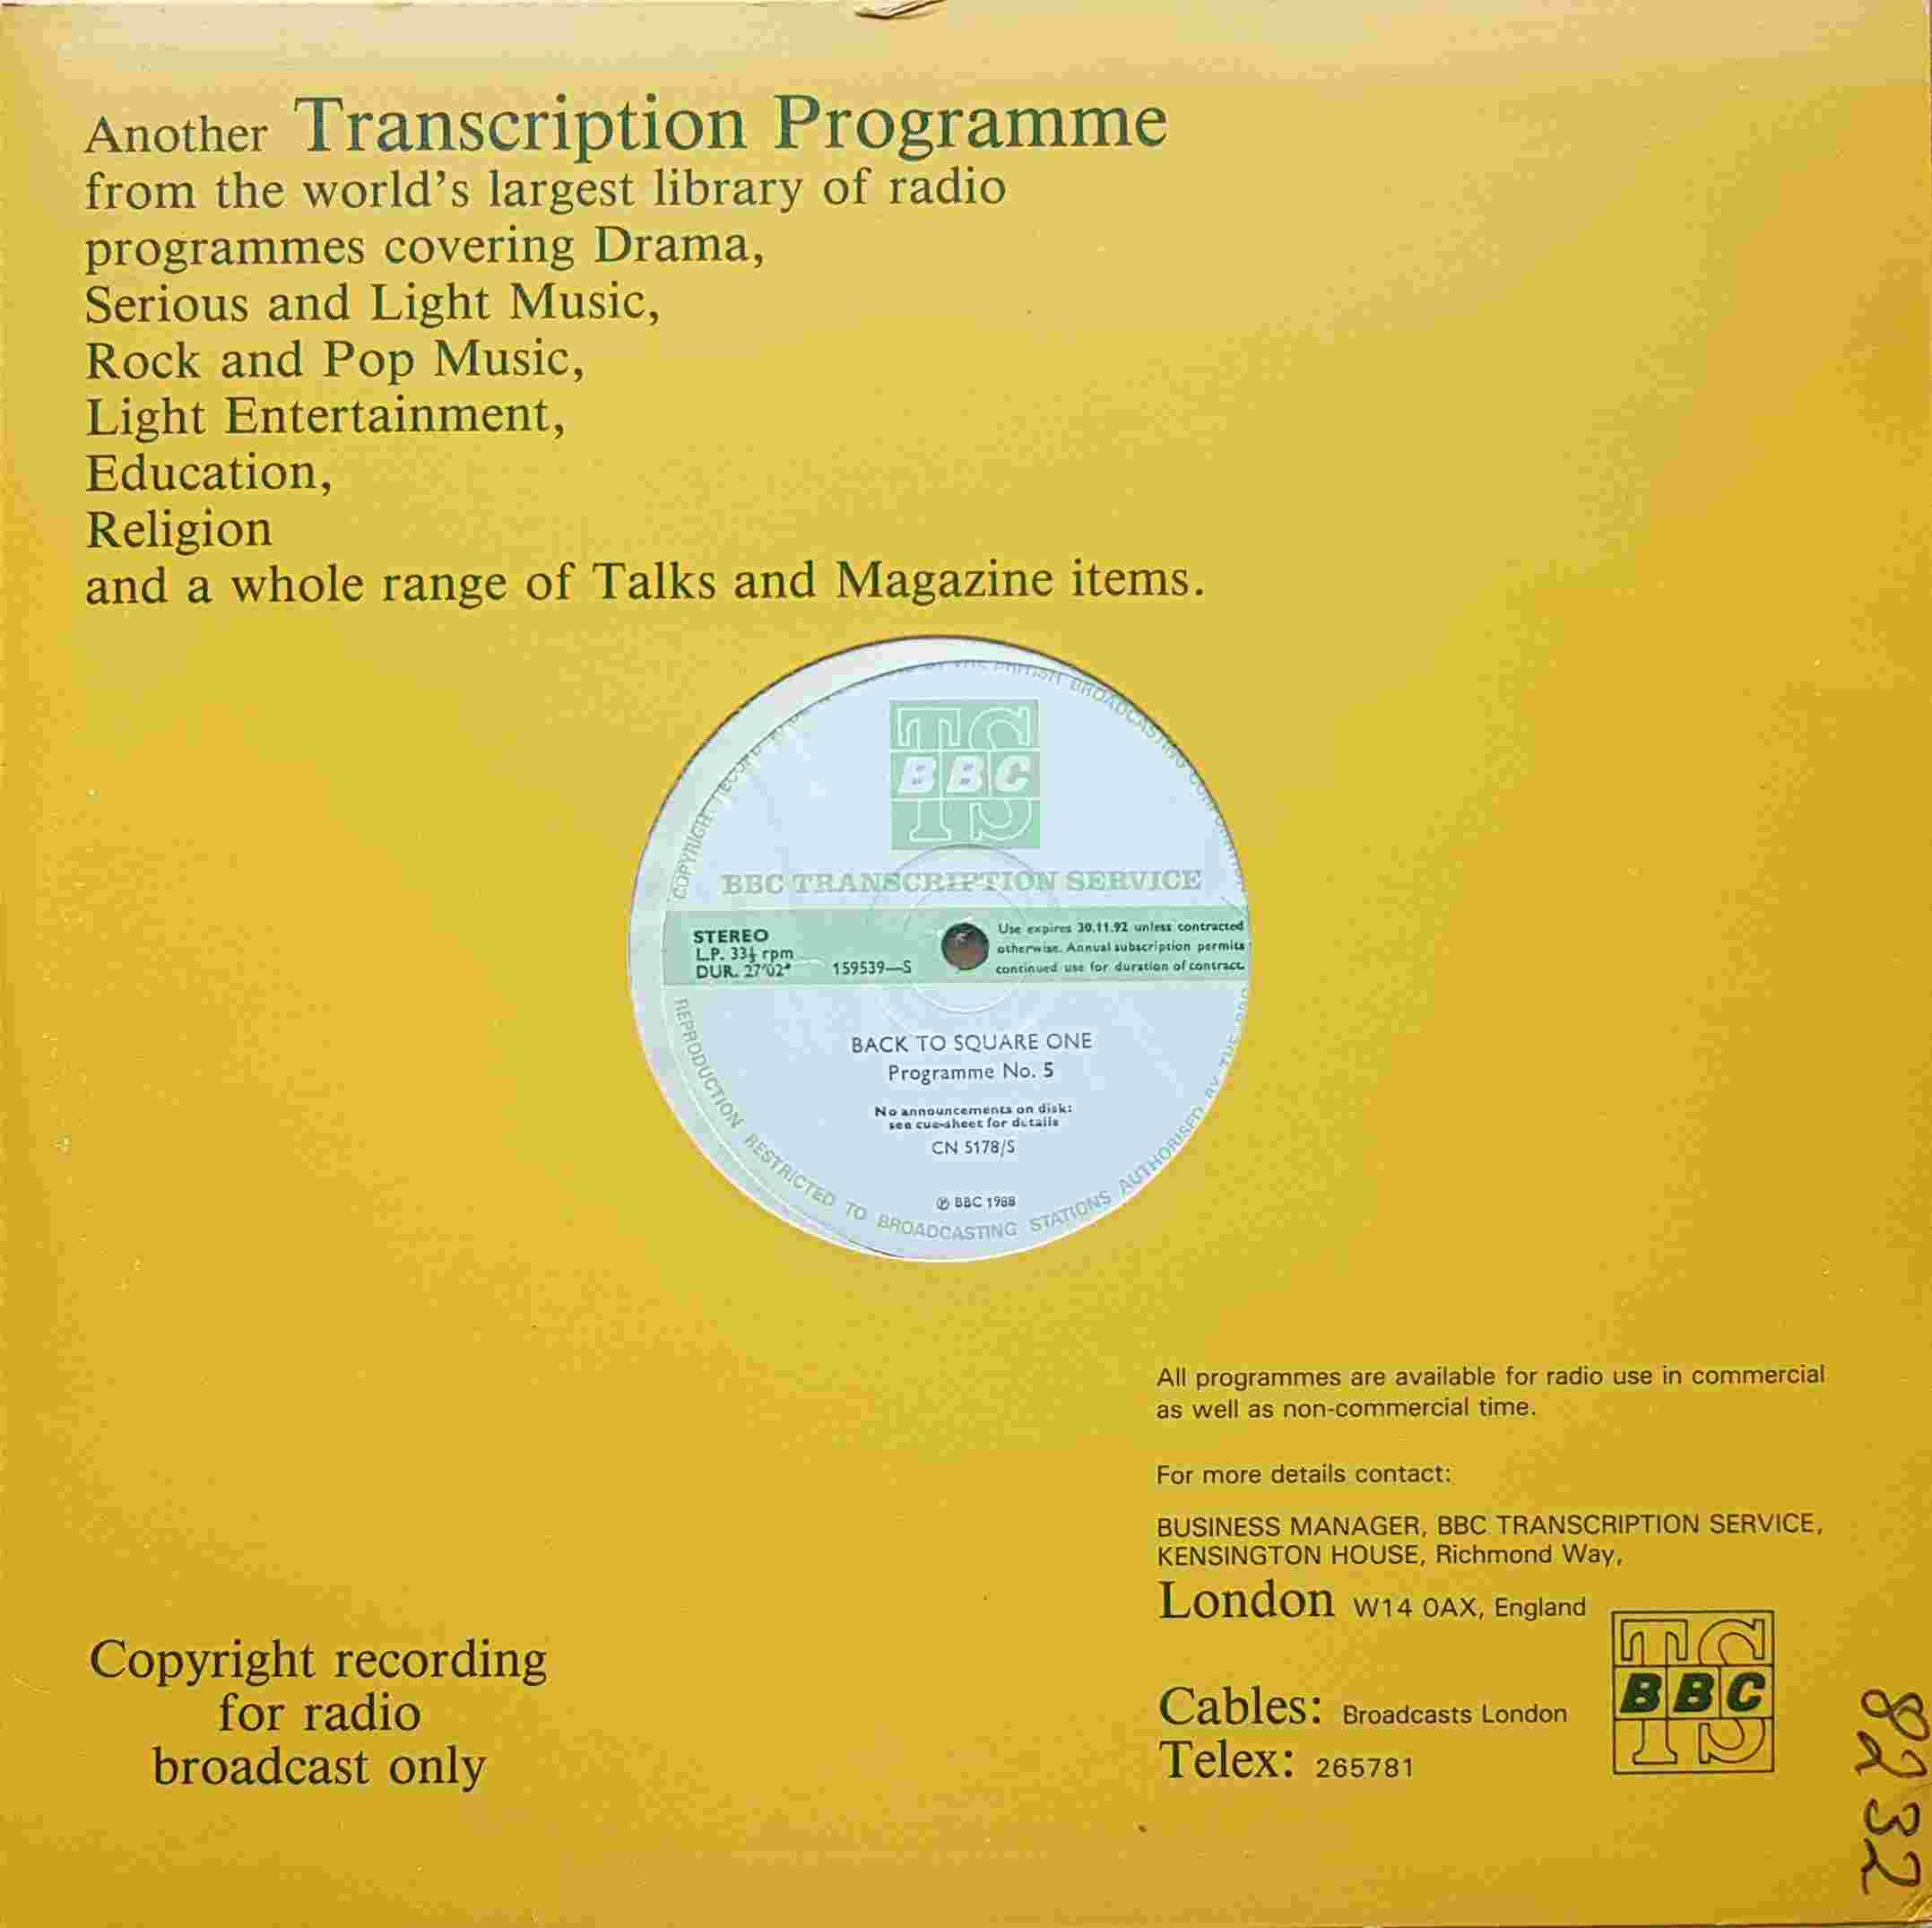 Picture of CN 5178 S 3 Back to square one - Programme 5 & 6 by artist Chris Serle from the BBC albums - Records and Tapes library